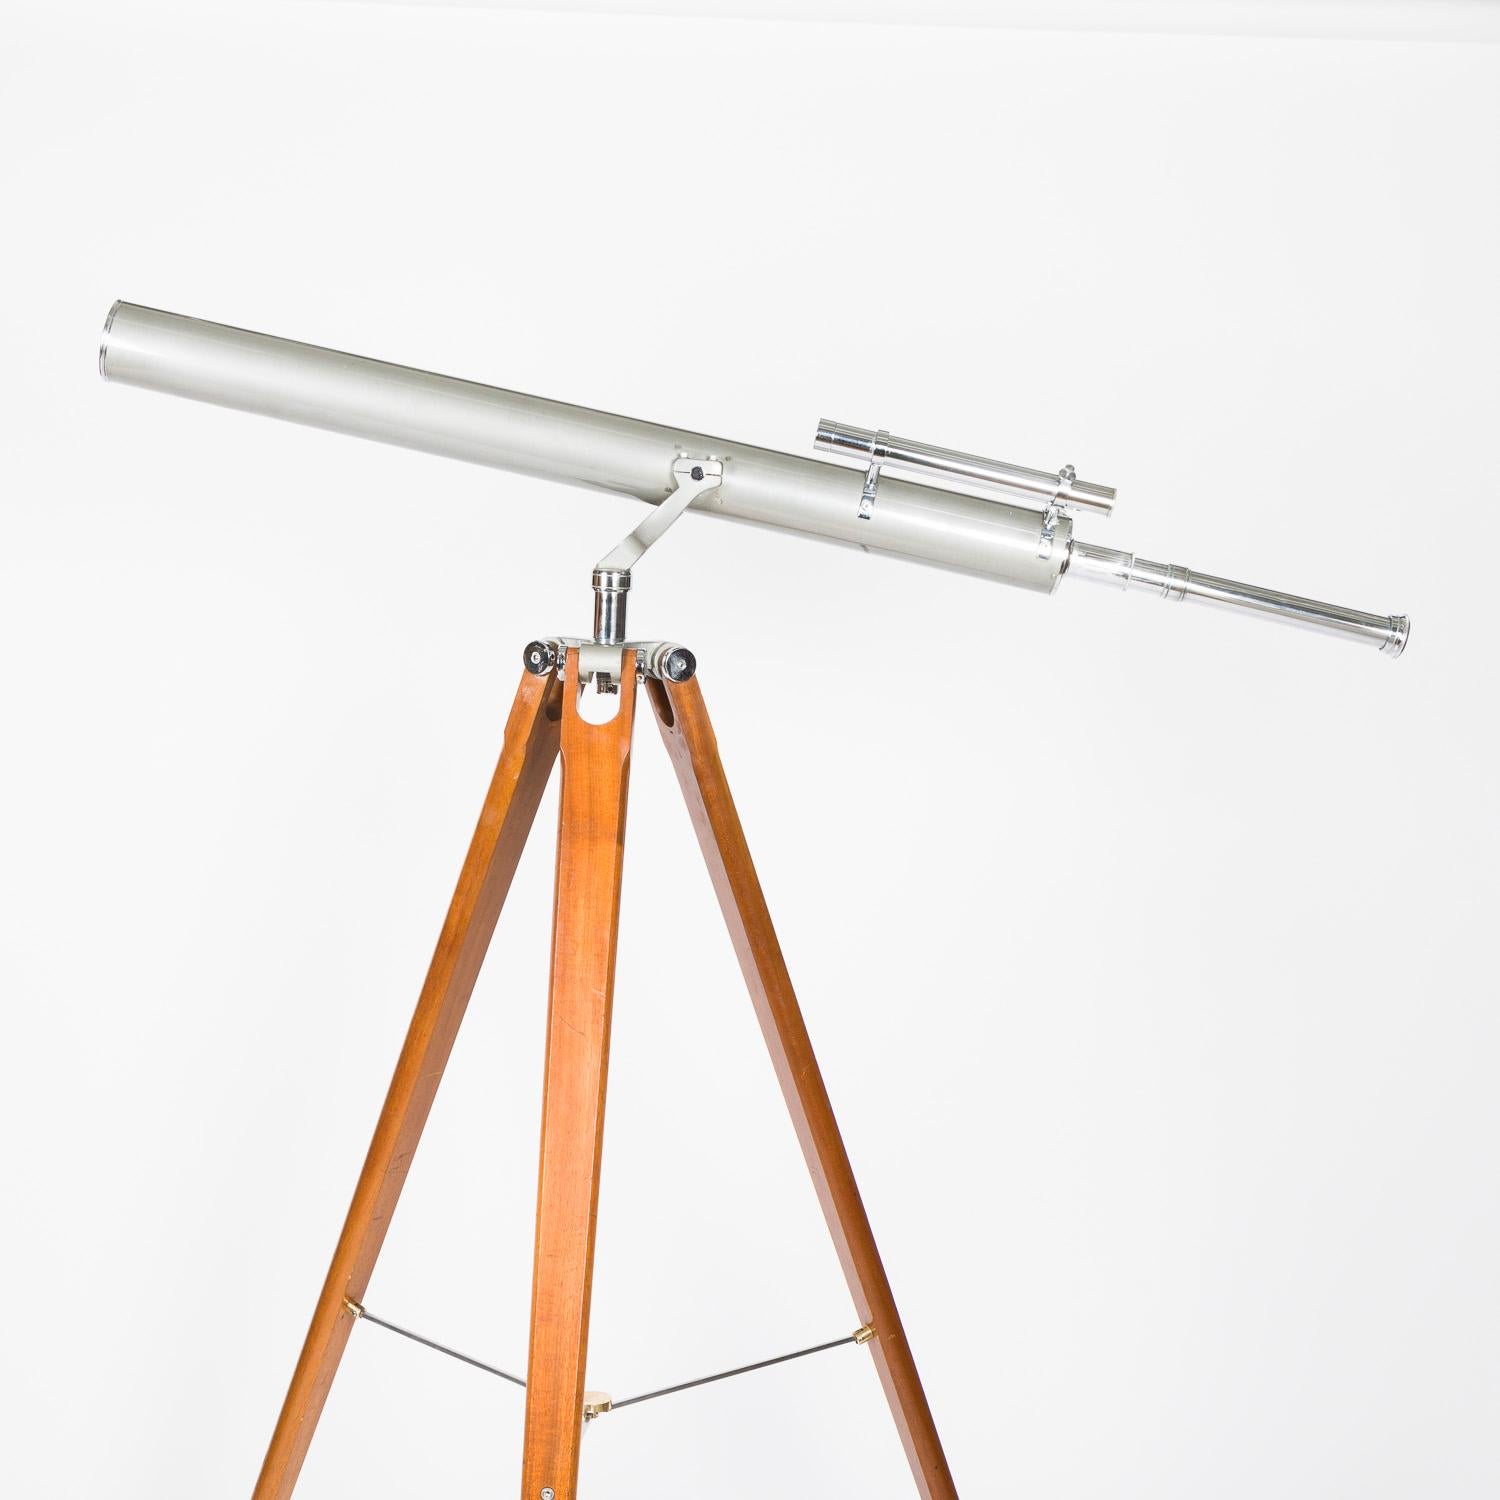 English Astro tripod mounted telescope by Dollond of London